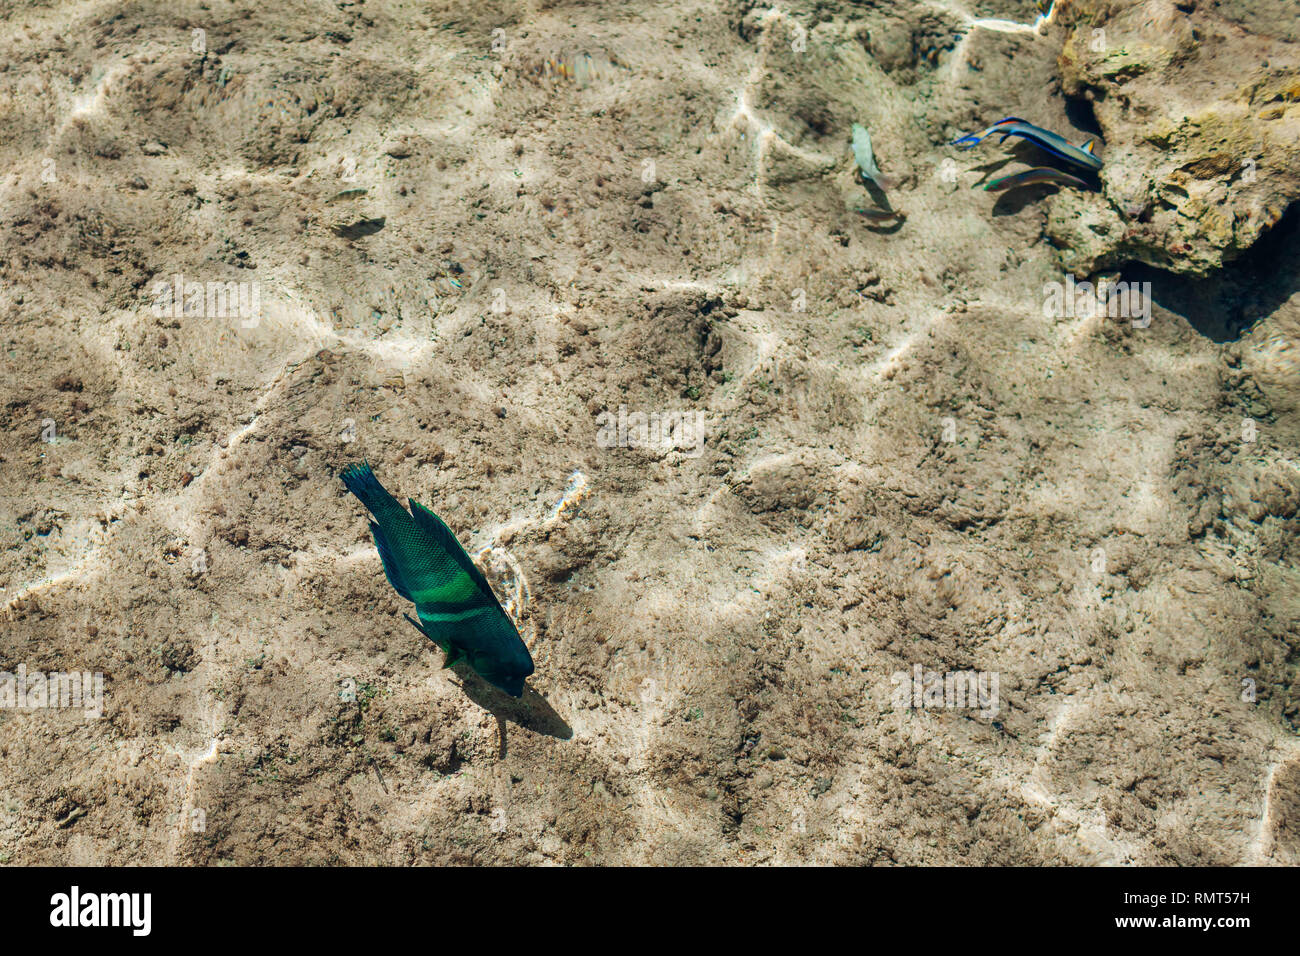 Coral fish in the Red Sea. Green and blue big fish looking for food in clear water. Egypt Stock Photo